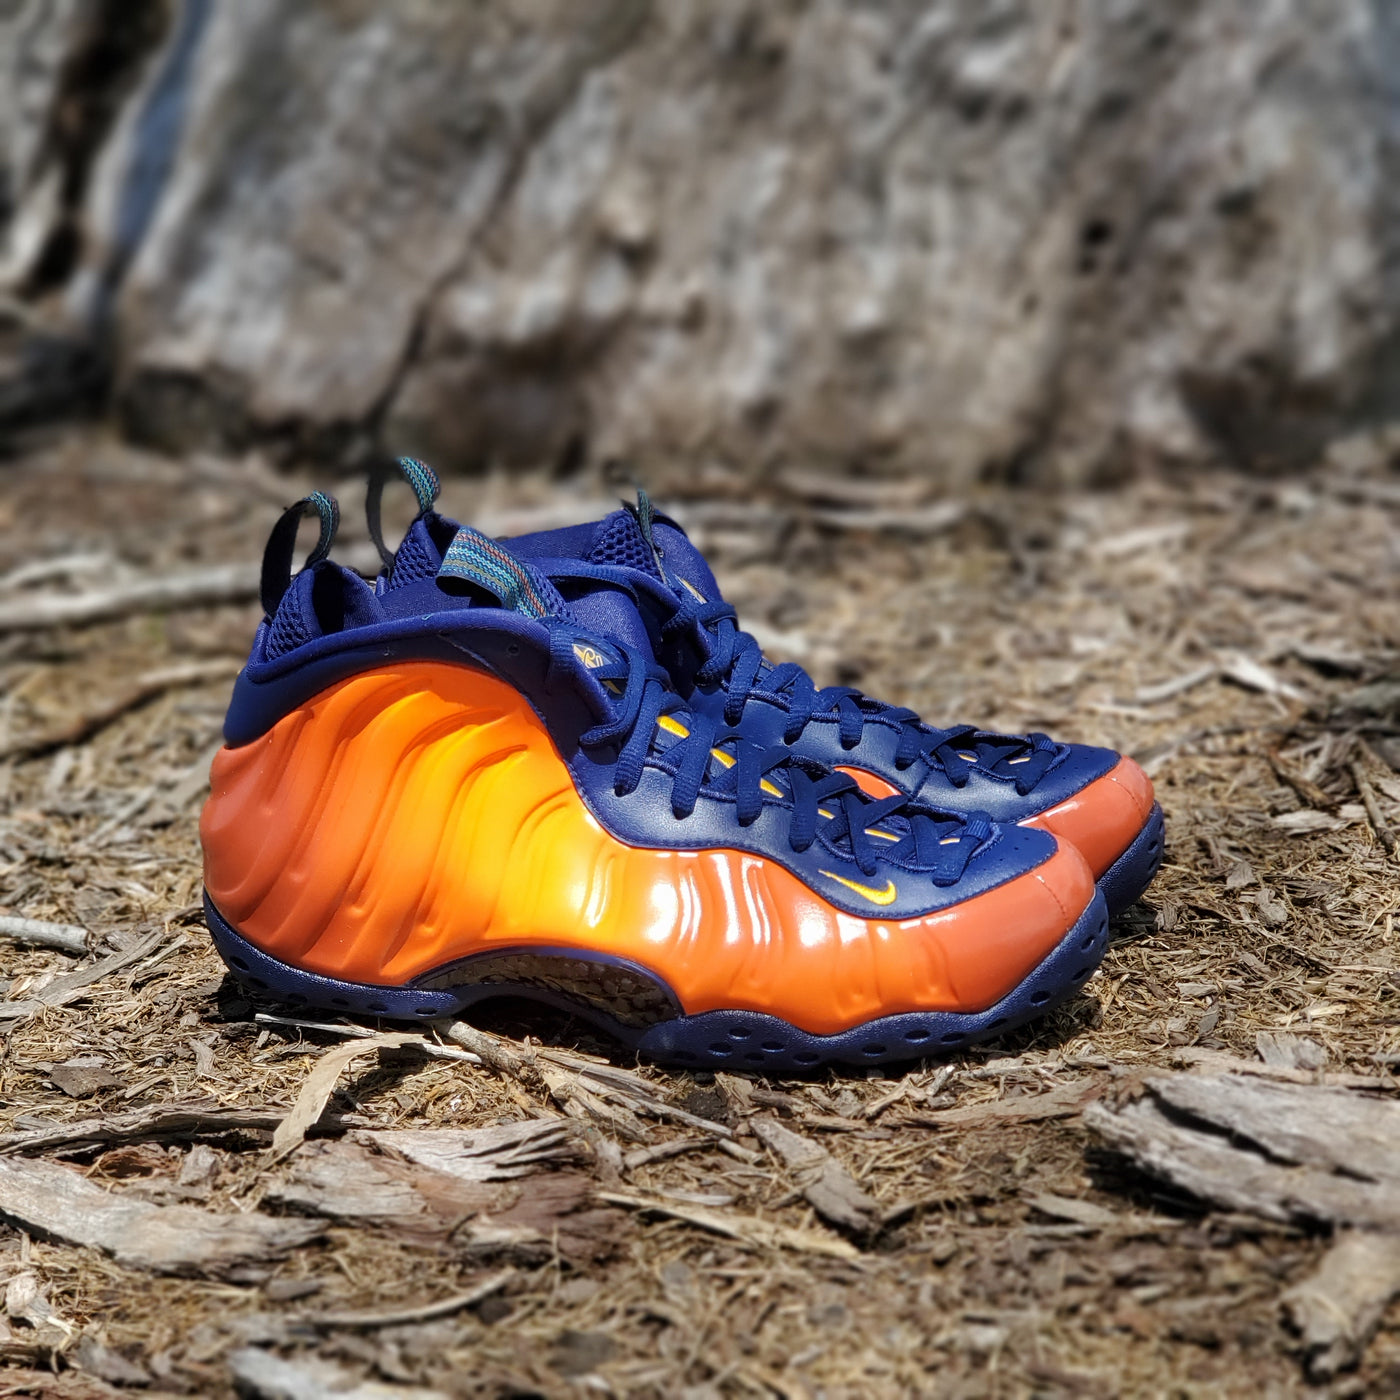 An Official Look at the 'Rugged Orange' Nike Air Foamposite One